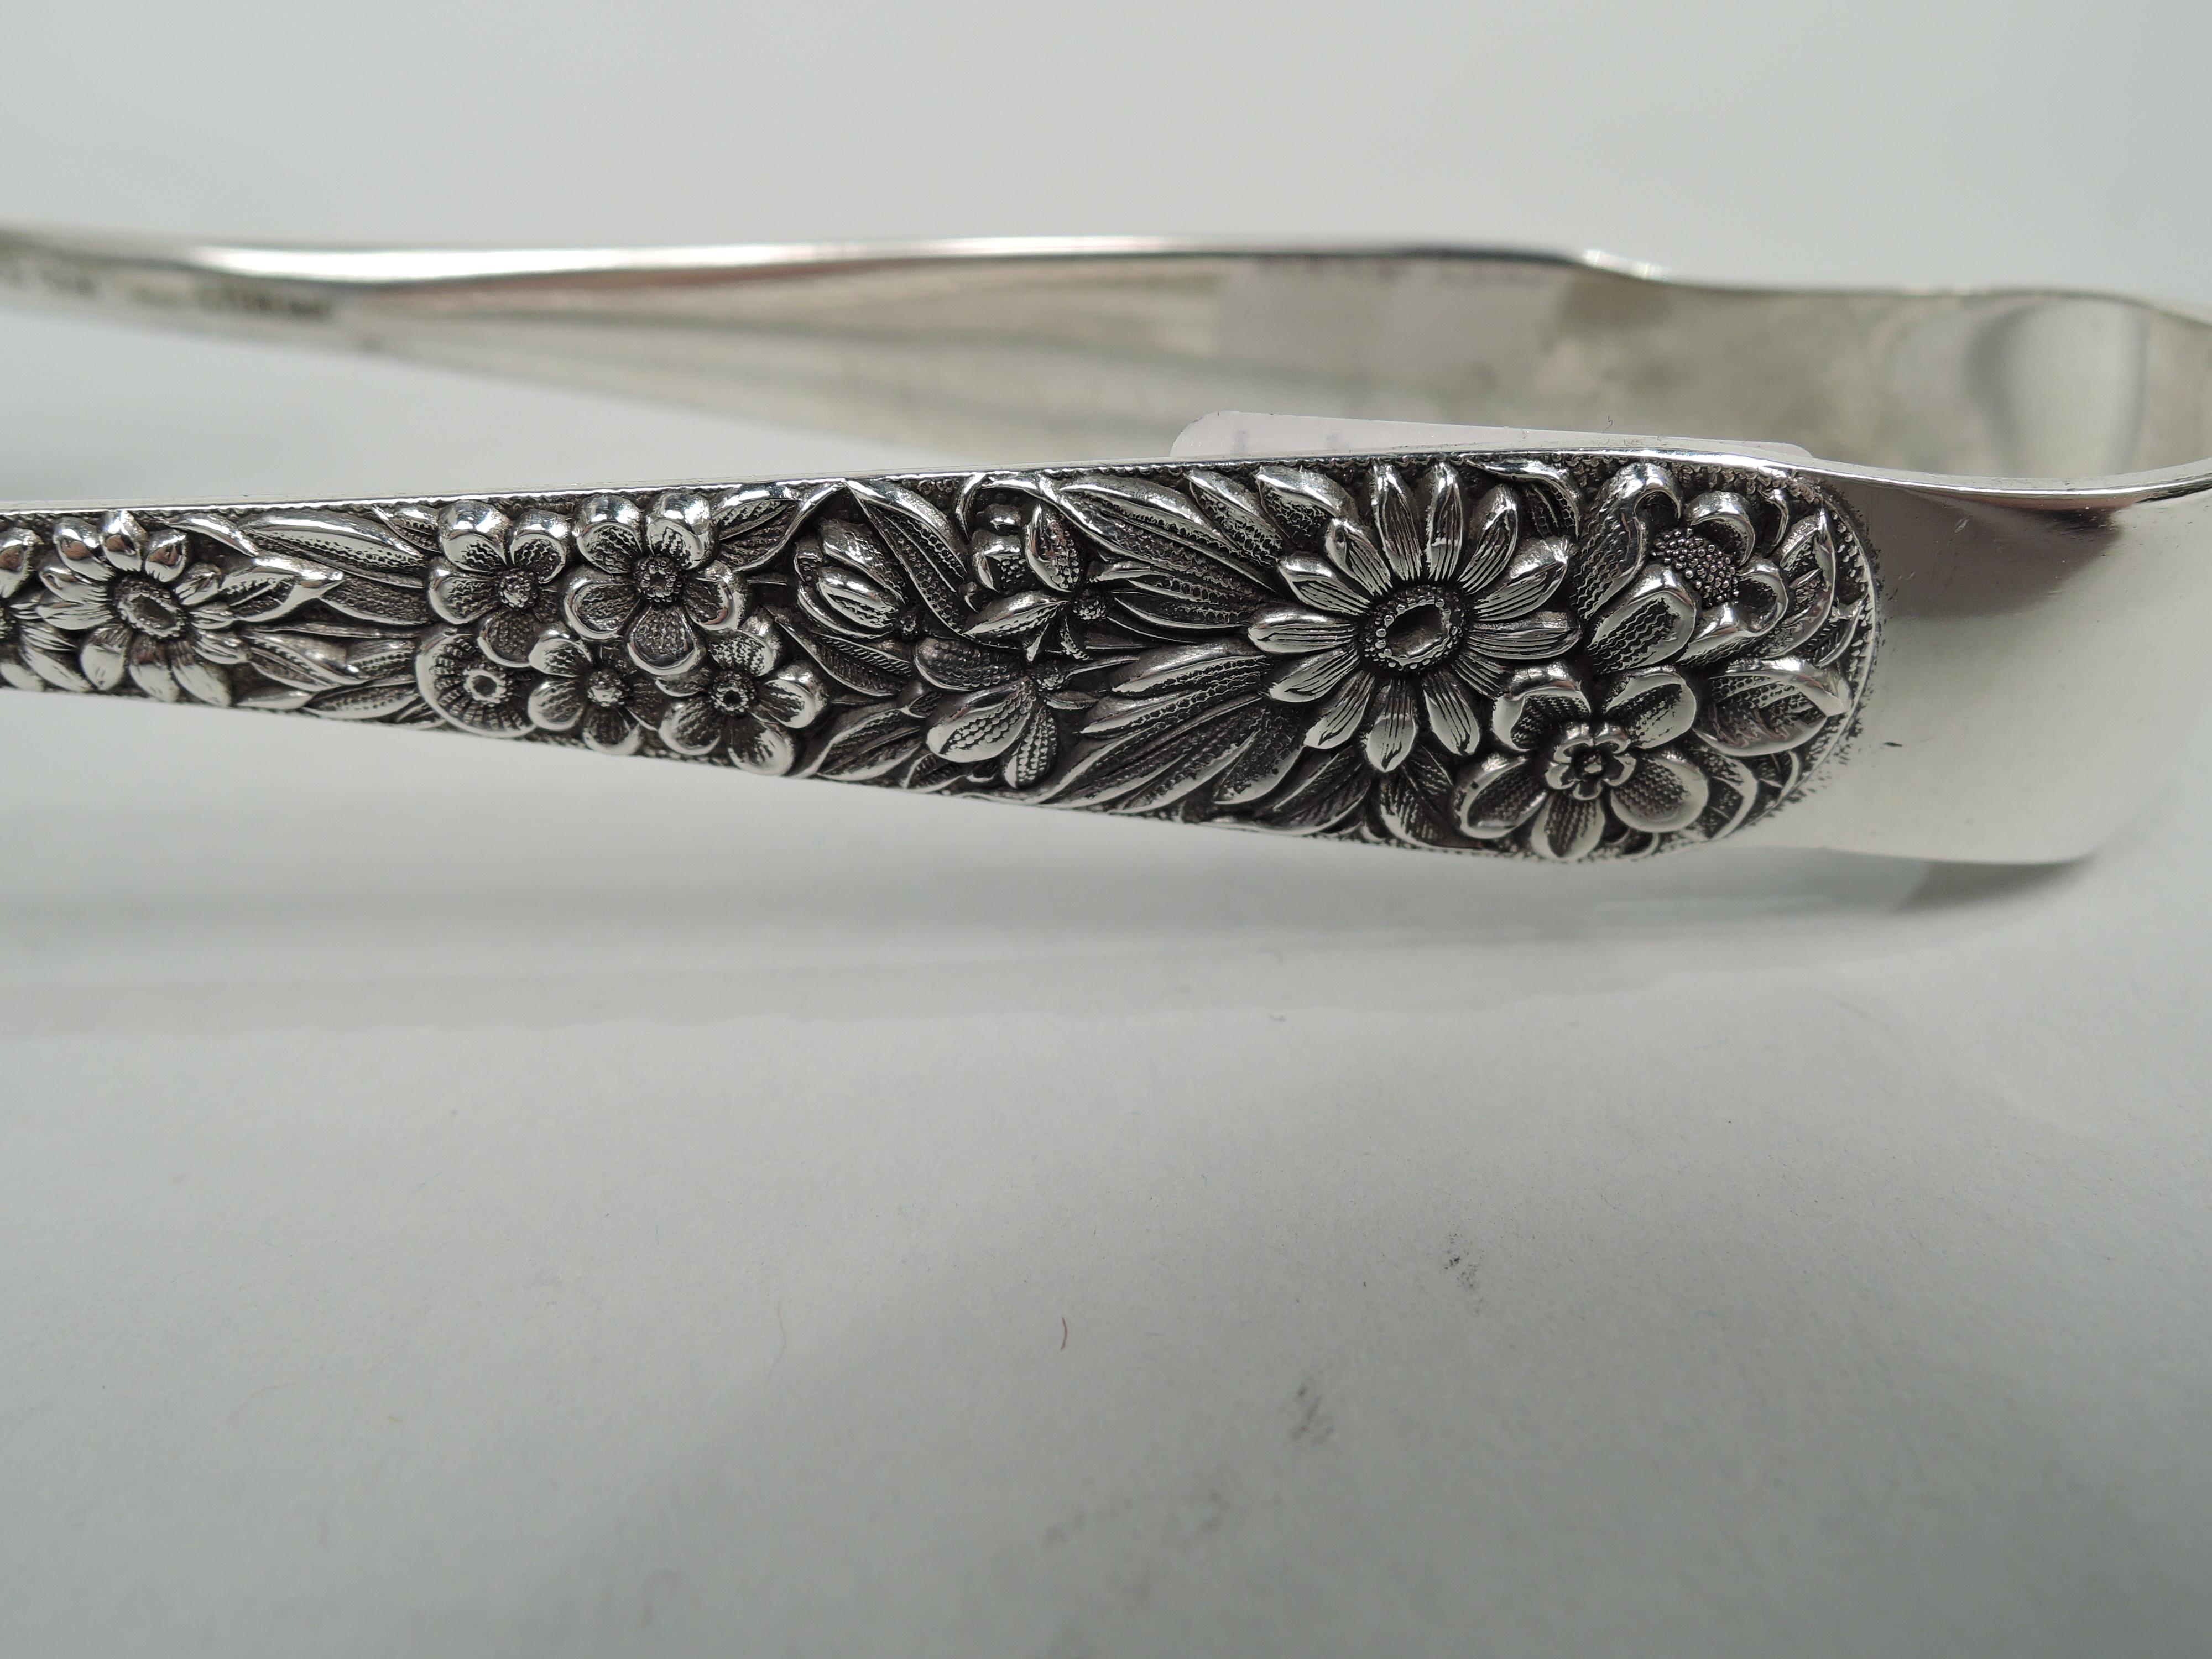 Repousse sterling silver ice tongs. Made by S. Kirk & Son in Baltimore, ca 1890. U-form with leaf jaws and floral repousse applied to stems. Marked “S. Kirk & Son Sterling”. Weight: 2 troy ounces.